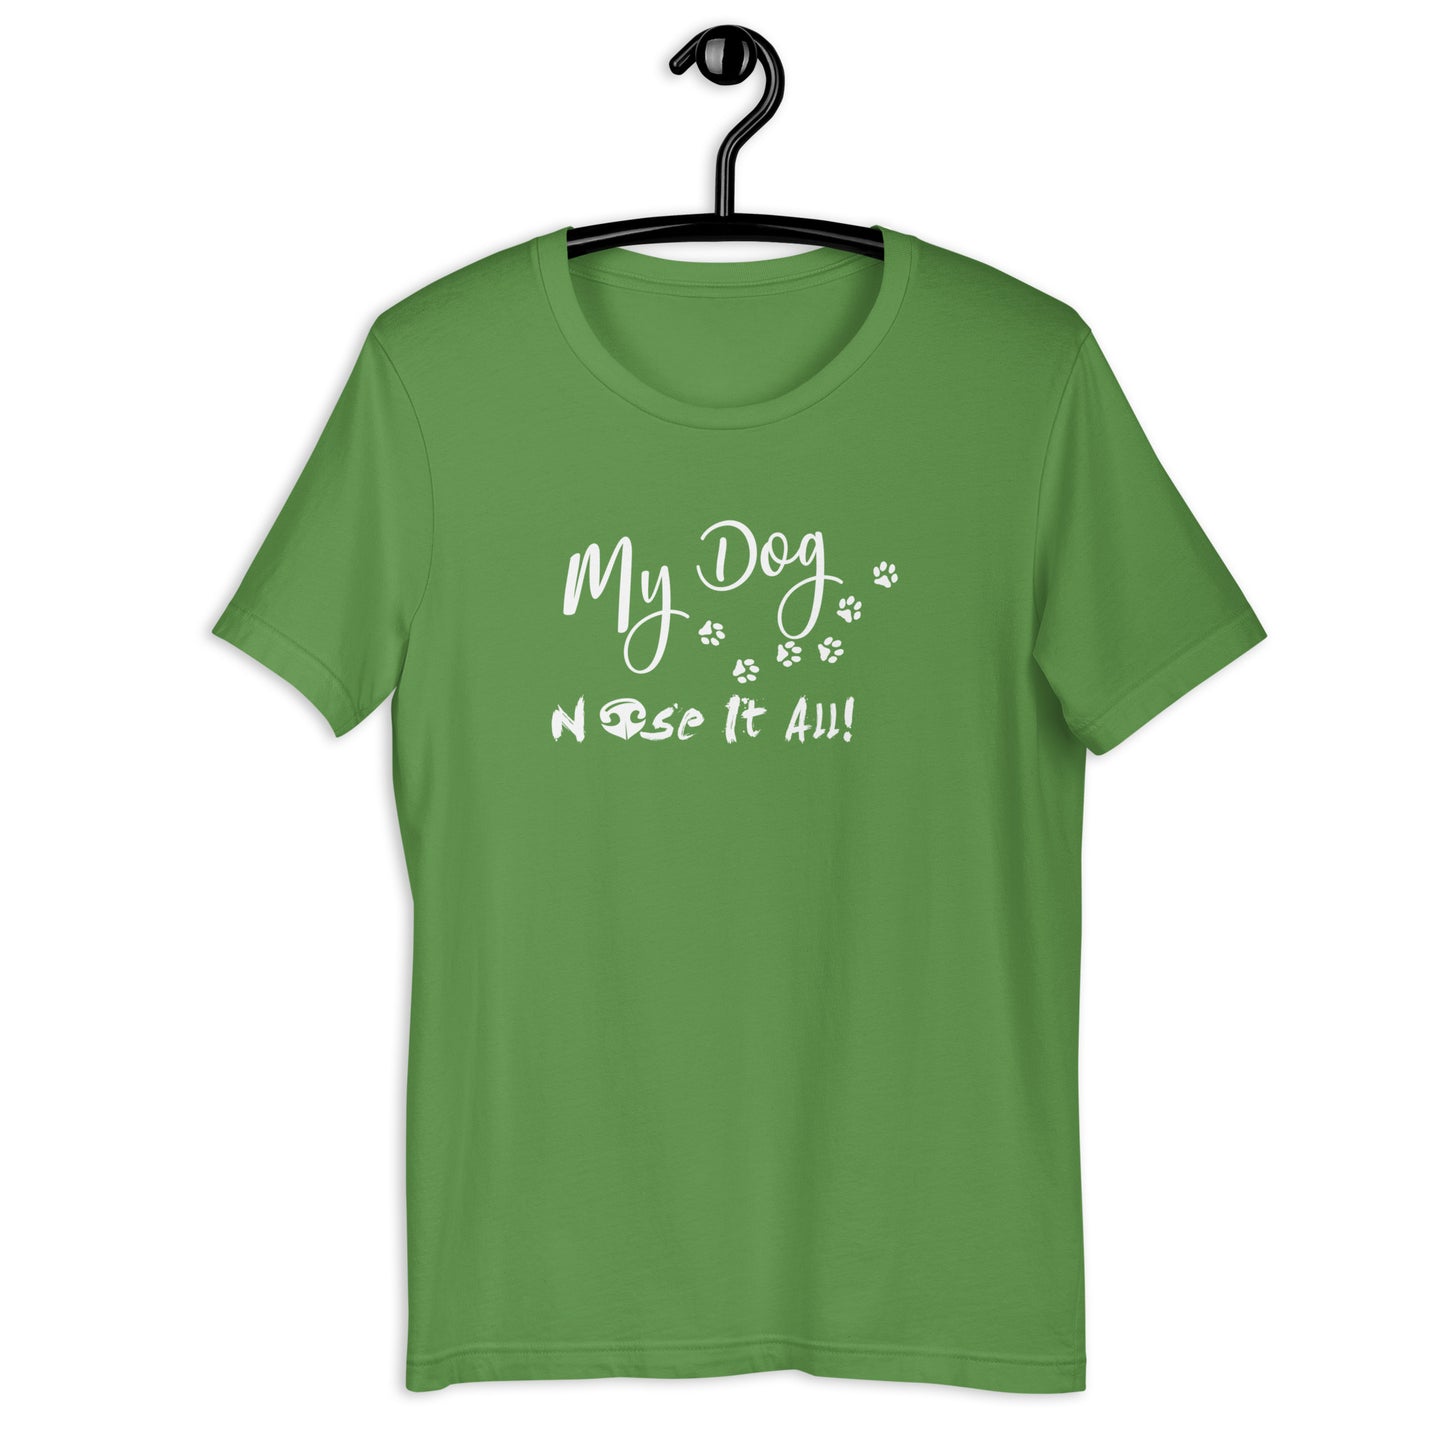 MY DOG NOSE IT ALL - PAWS - Unisex t-shirt